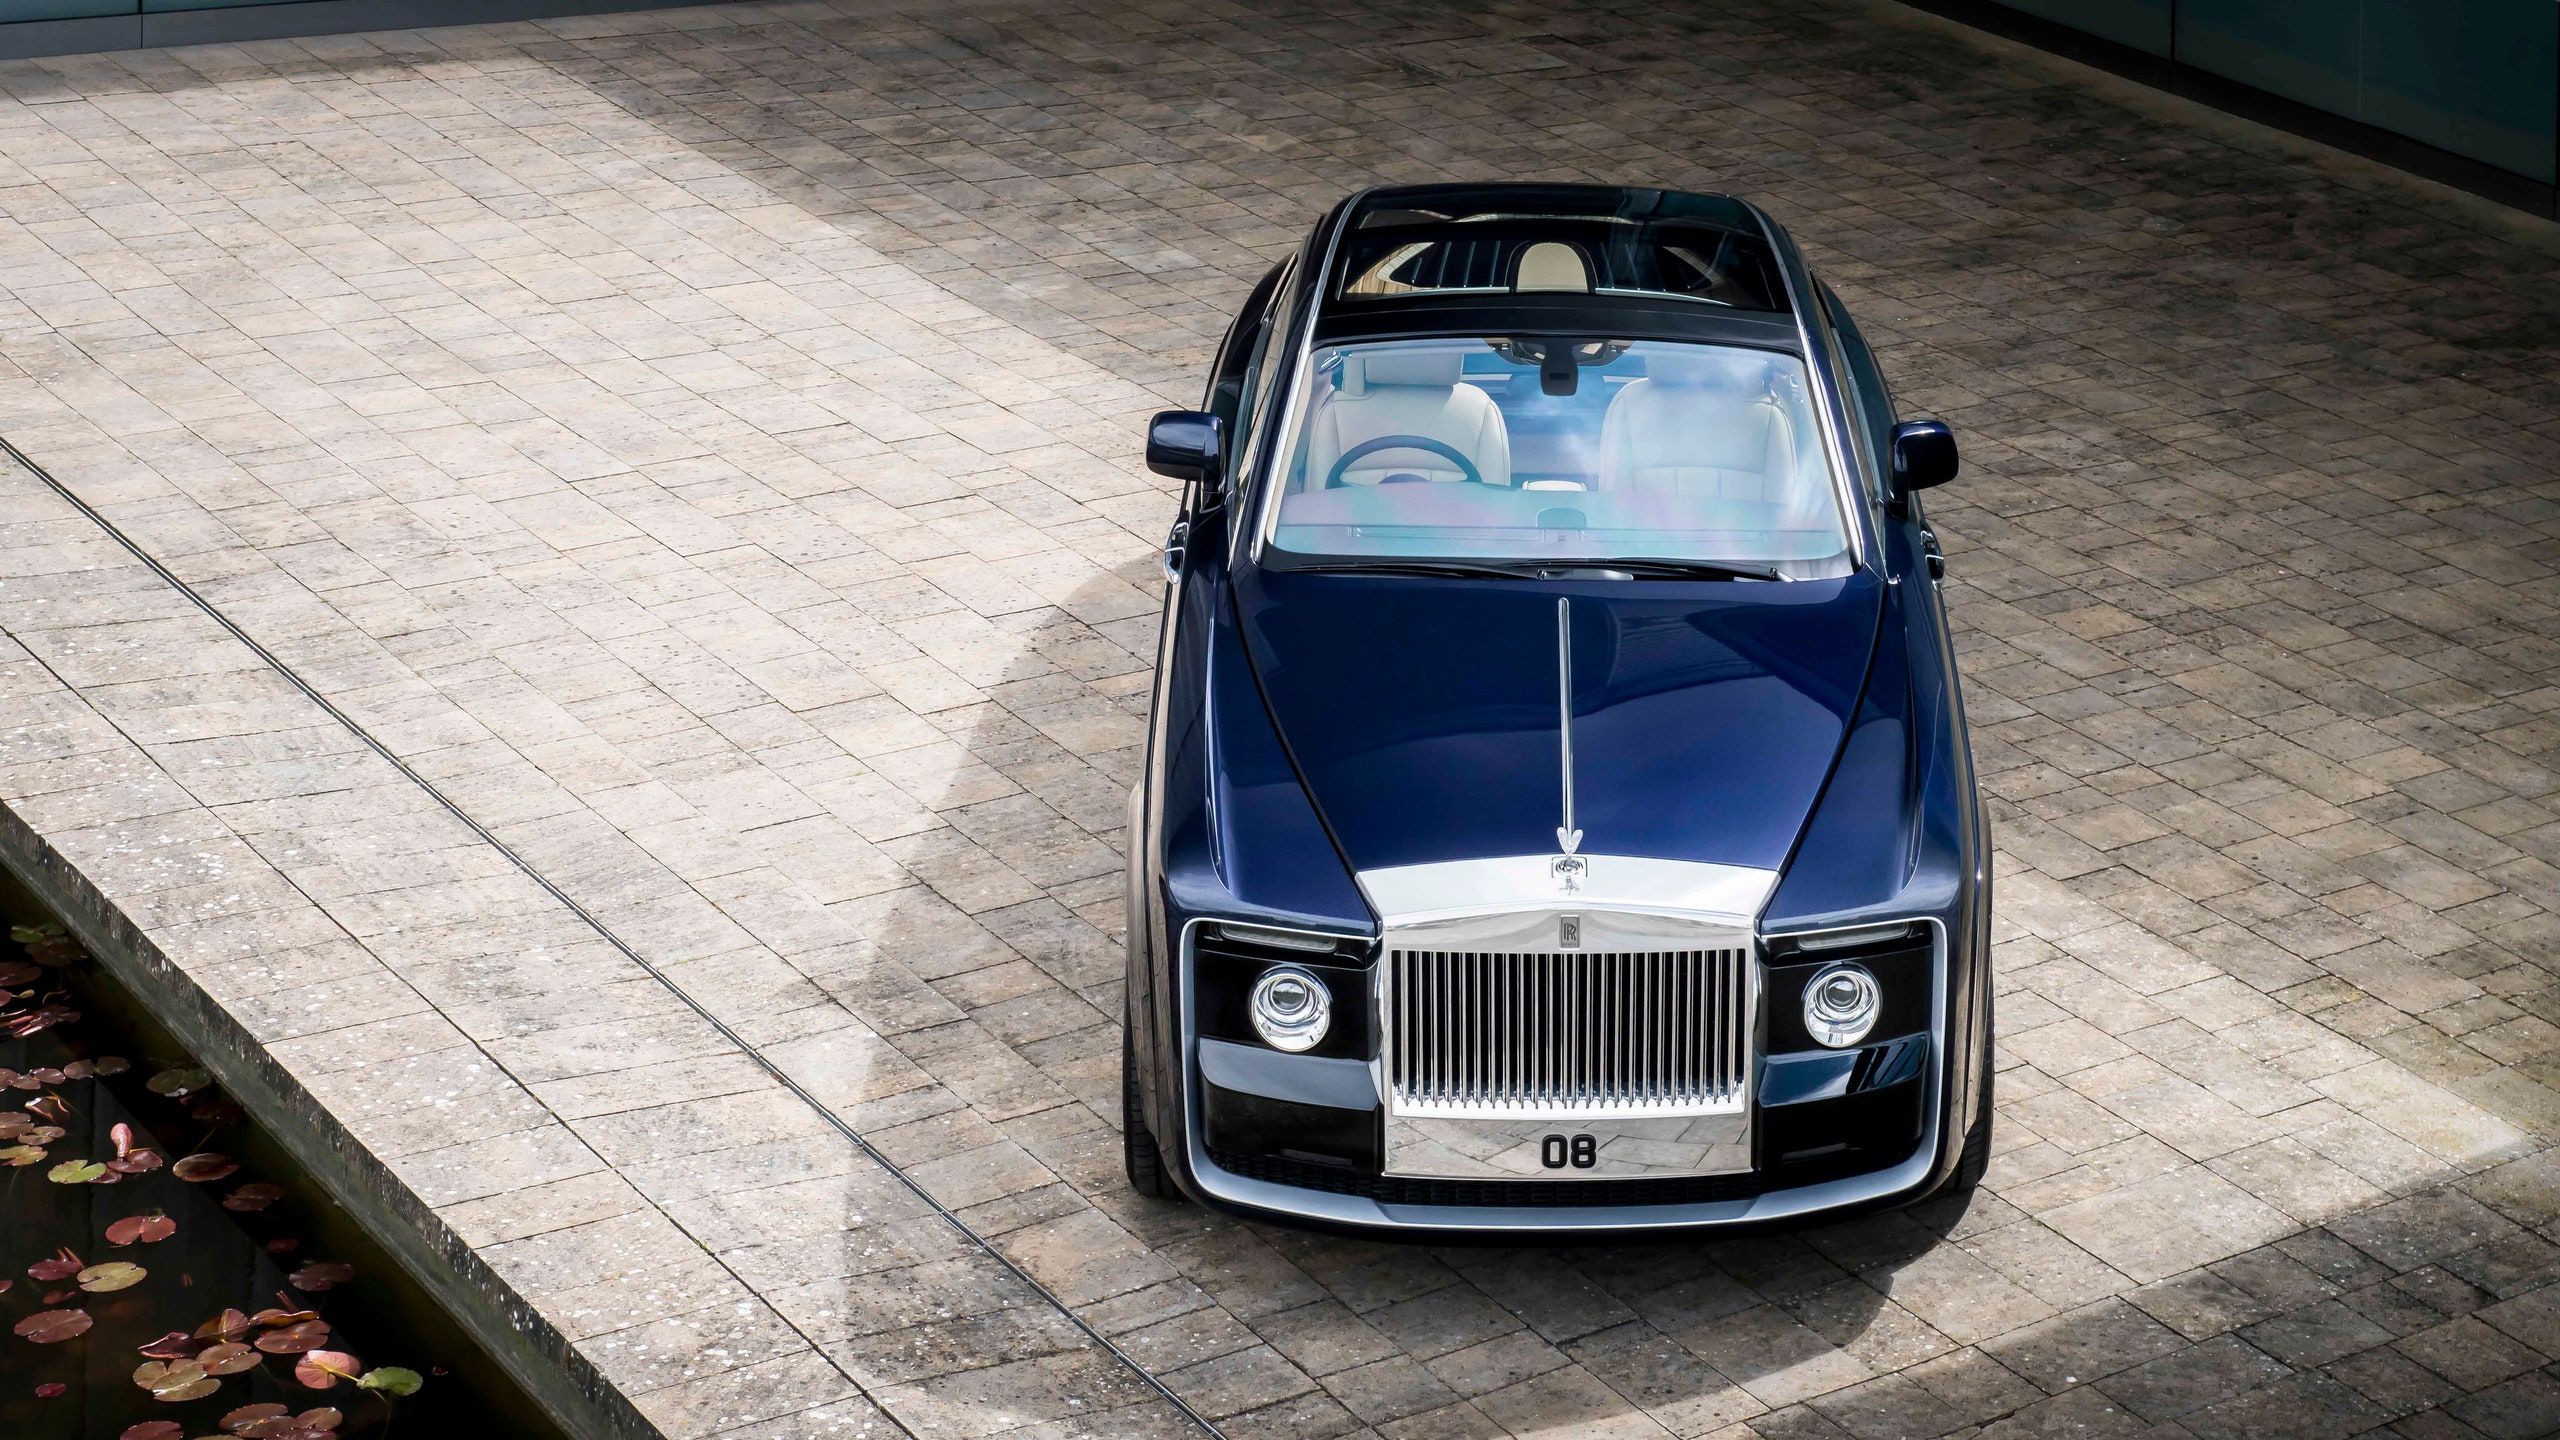 Rolls Royce's Latest Car Costs $12.8 Million—and Took Four Years To Build